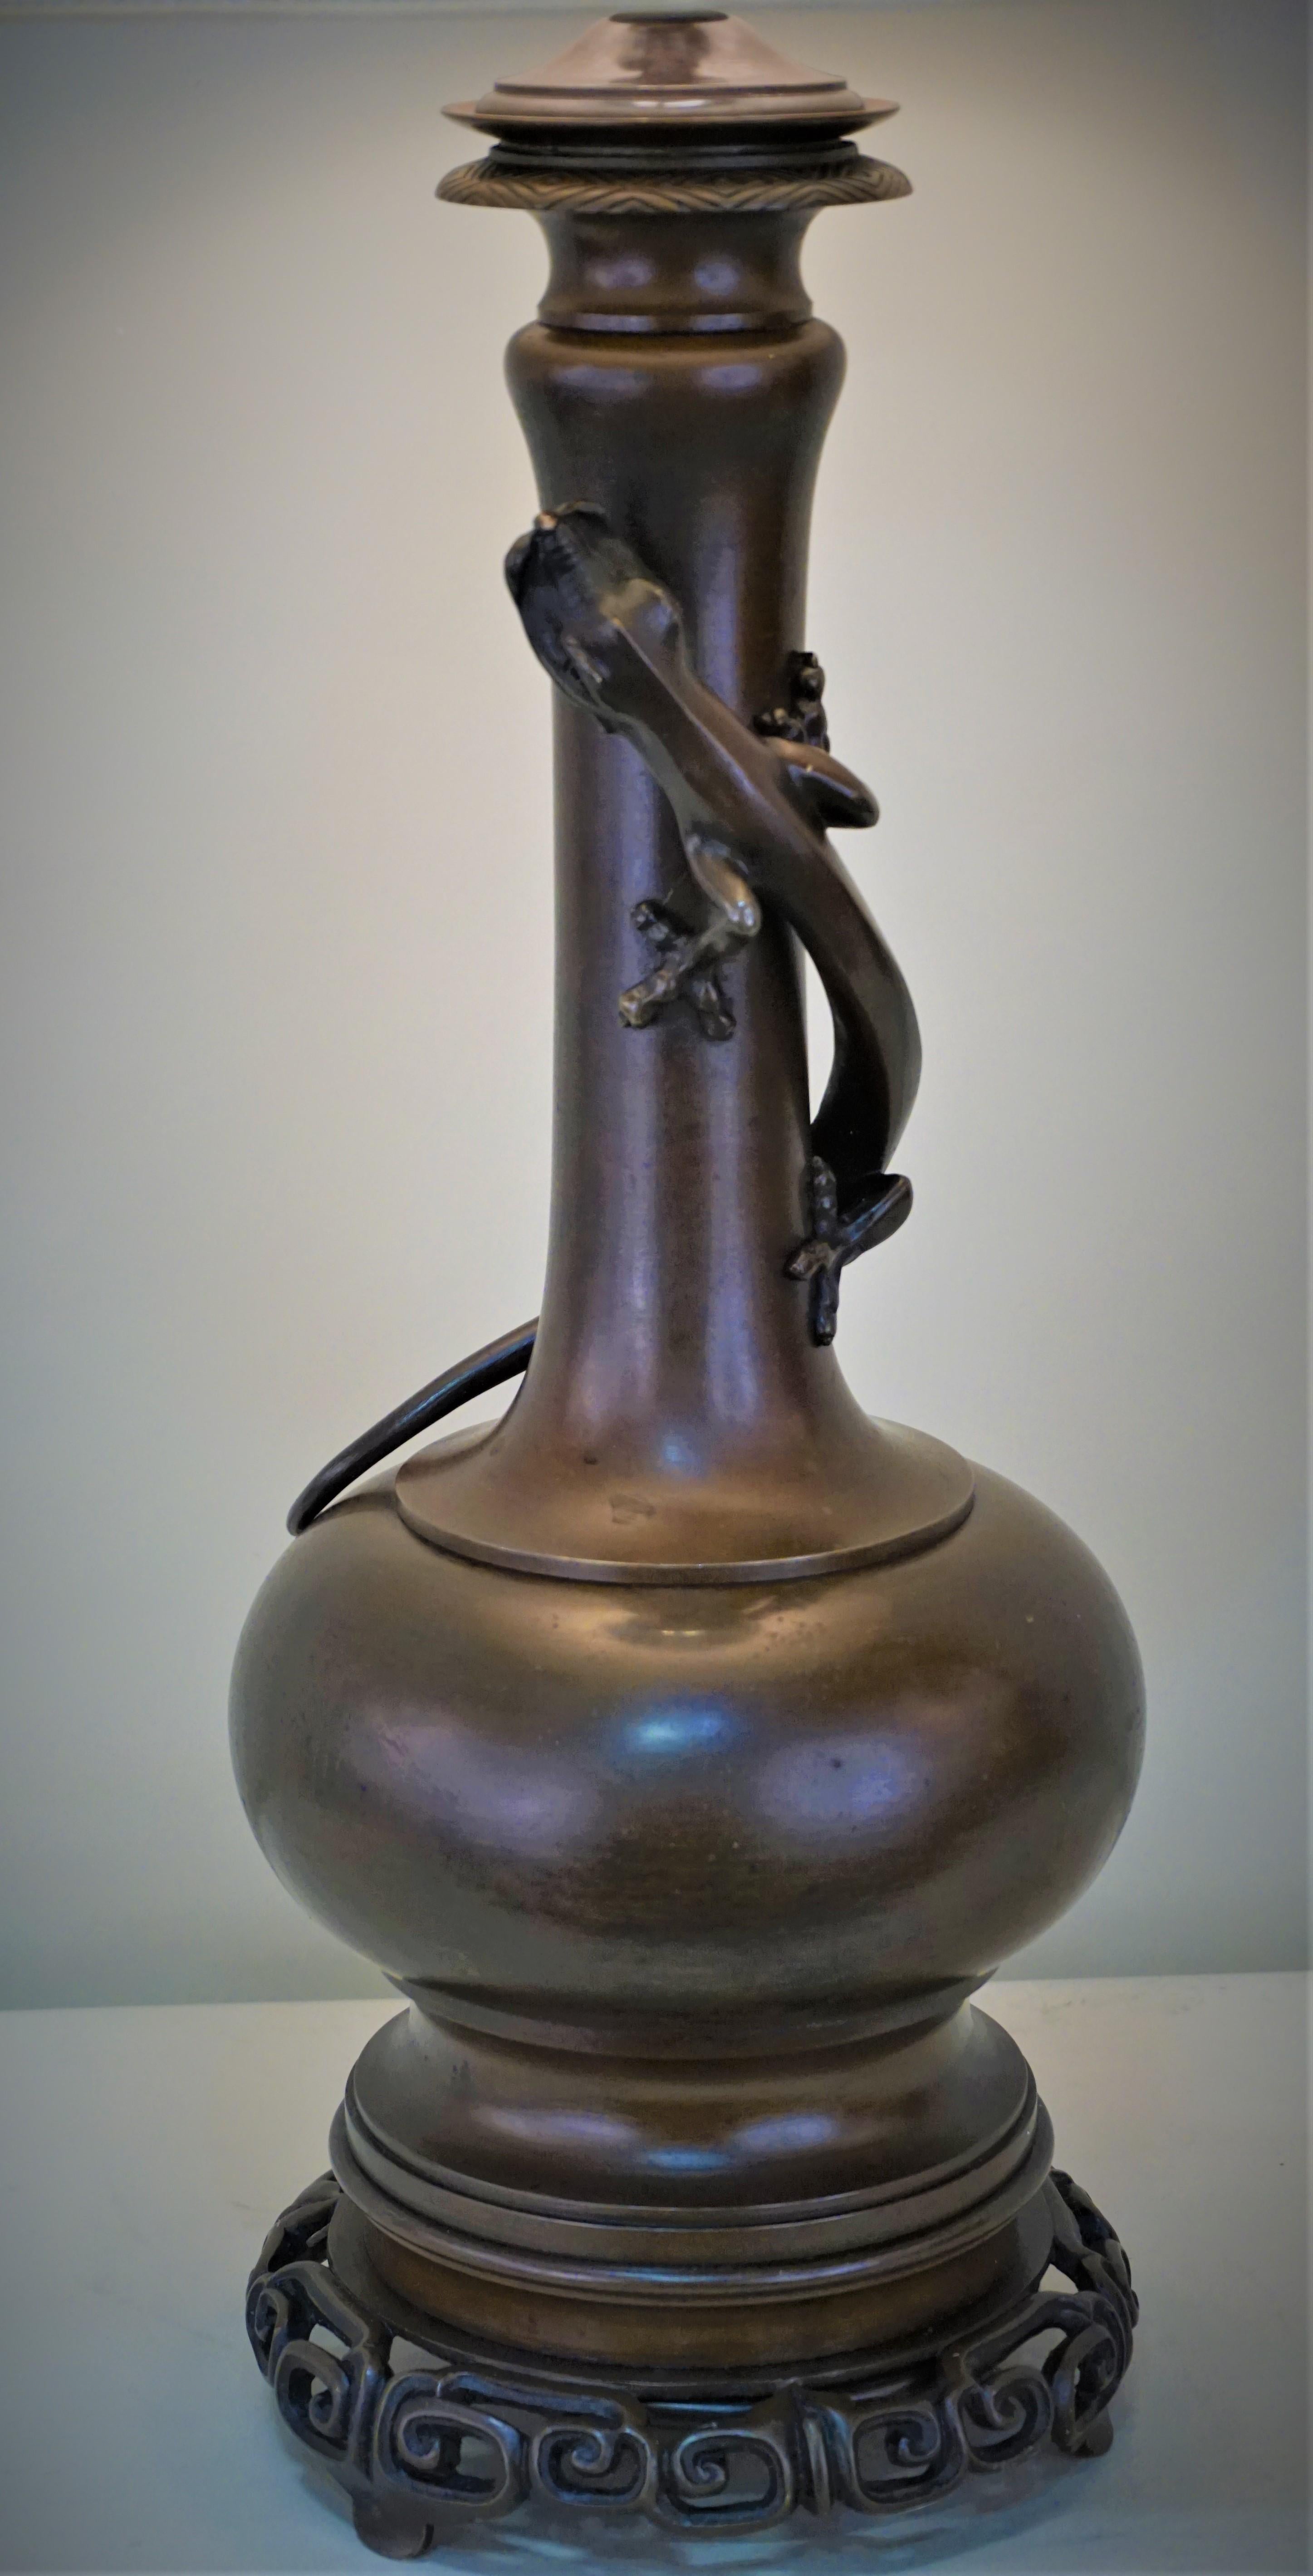 Wonderful two-color bronze with legend Lizard is associated with the dream time moving upward on the lamp. This original oil lamp have been electrified and fitted with silk lampshades.